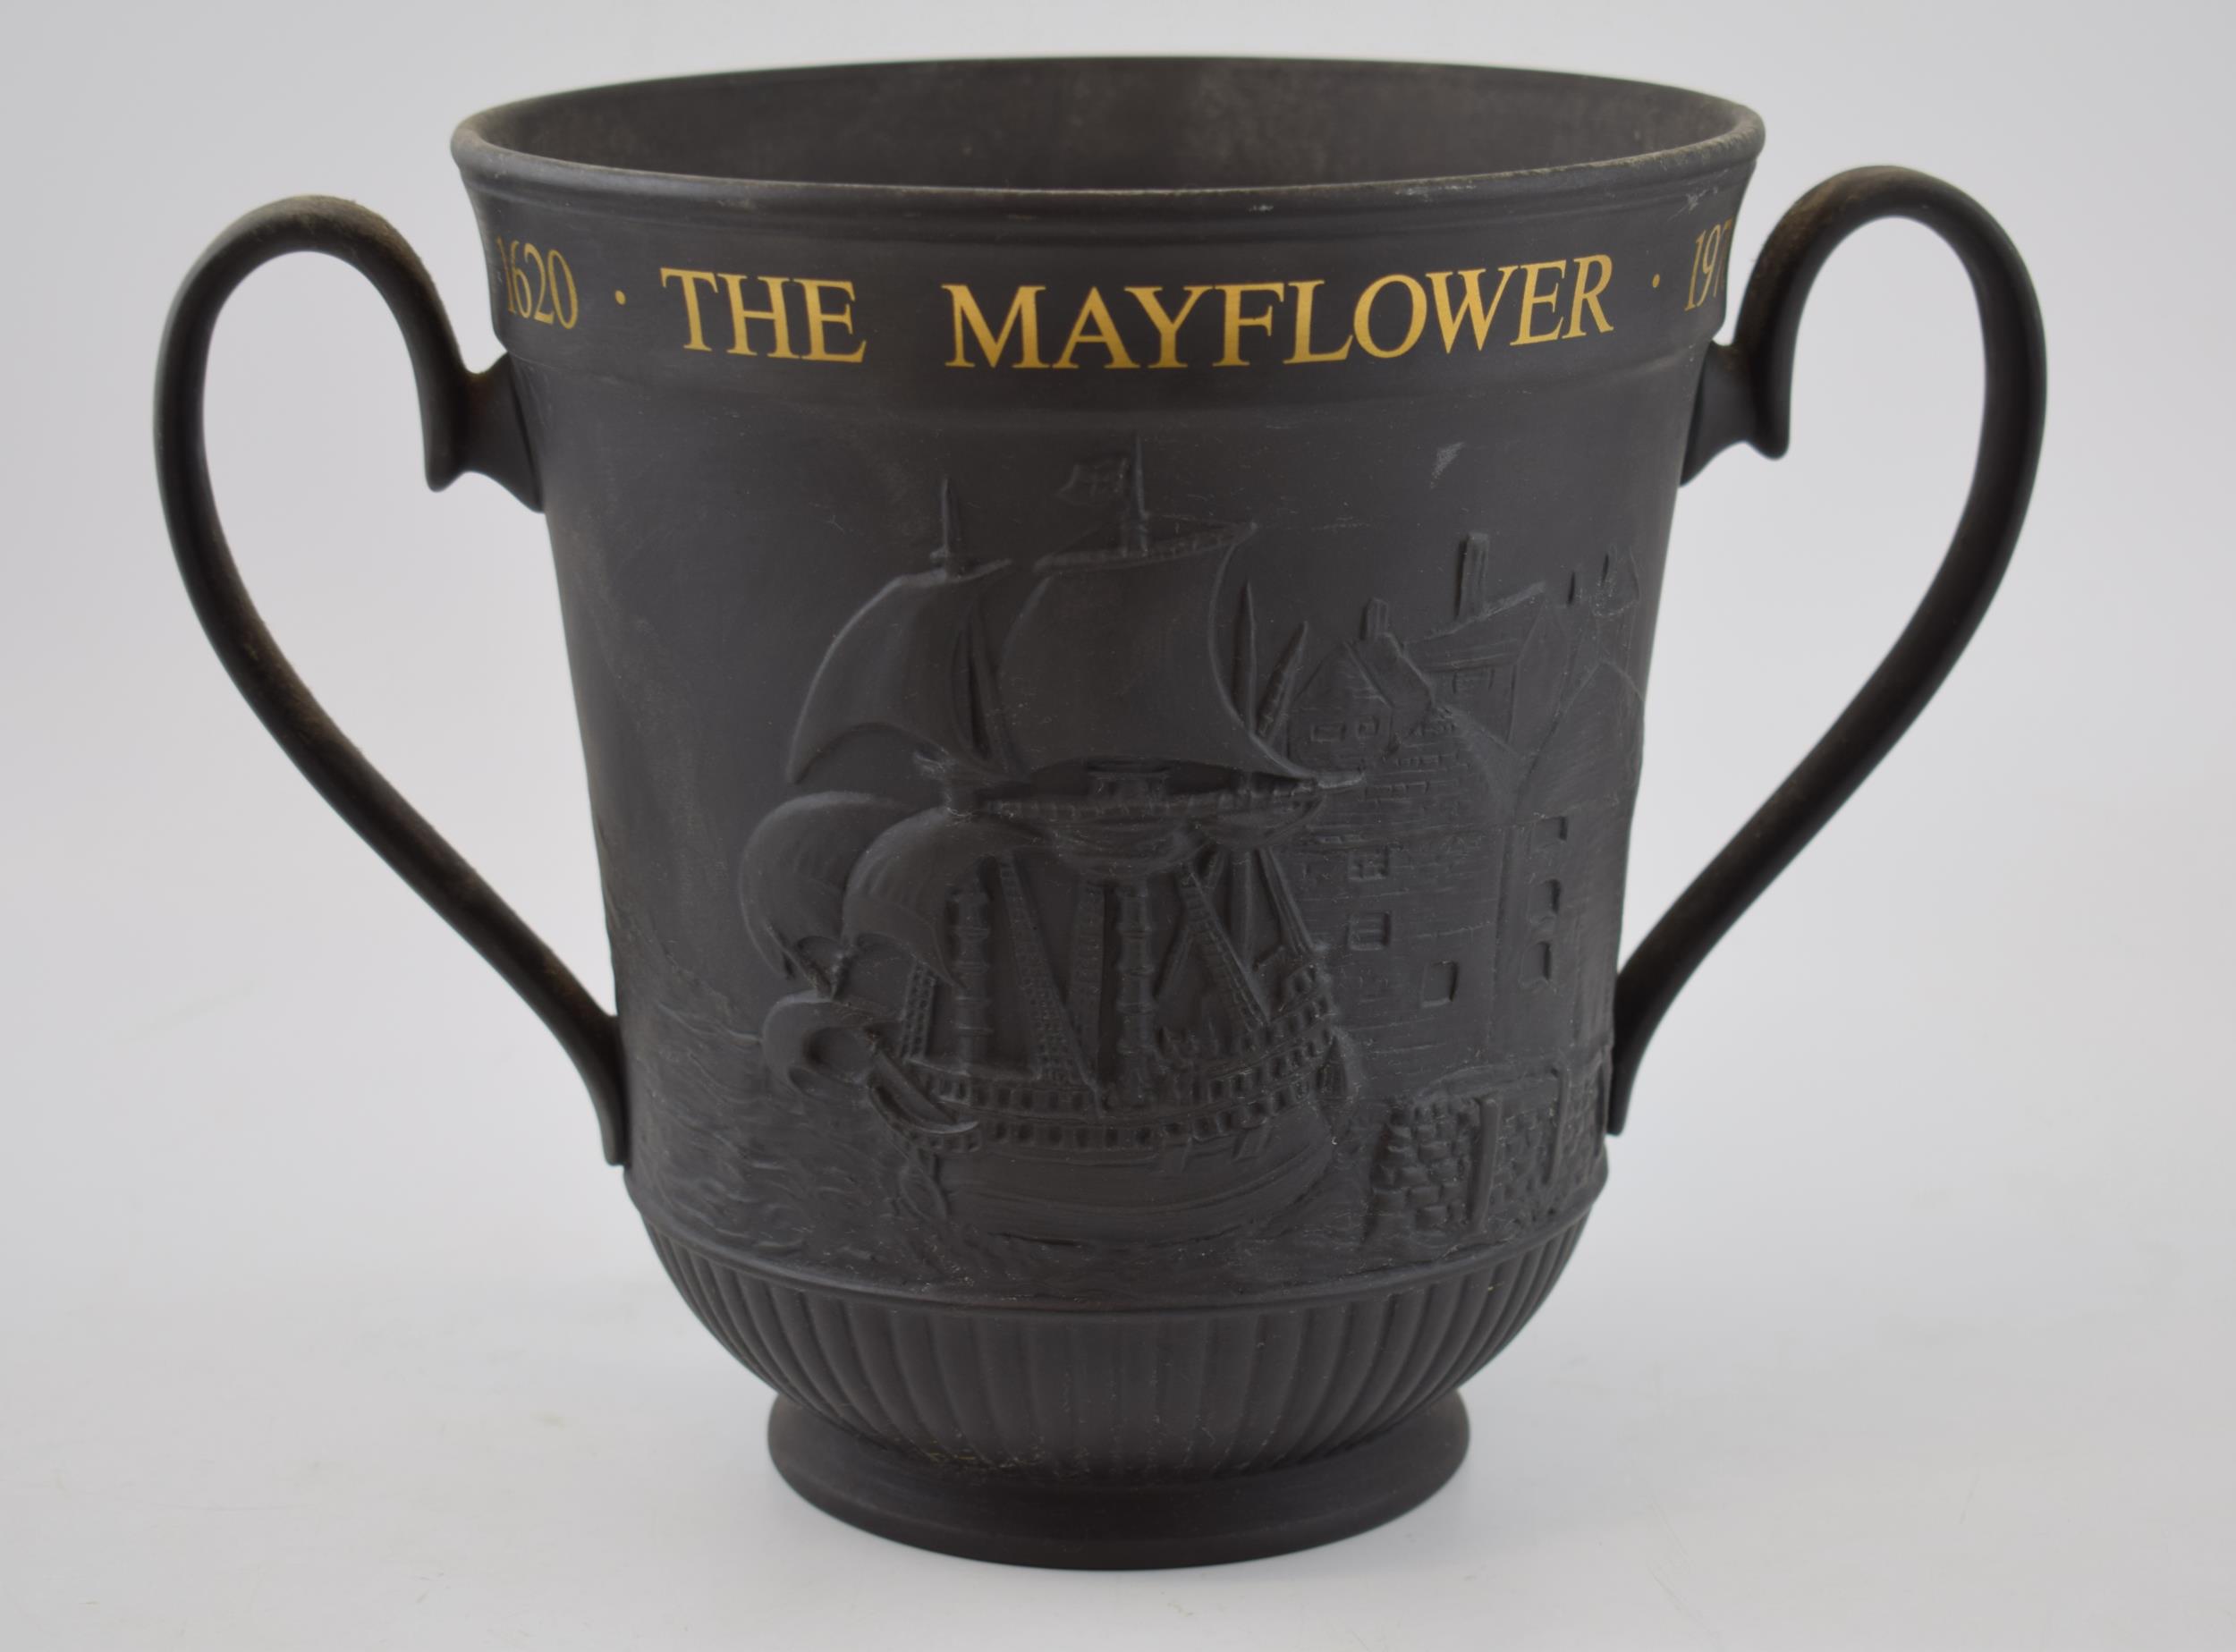 Royal Doulton Limited Edition Black Basalt 'The Mayflower' loving cup, 21cm tall. In good